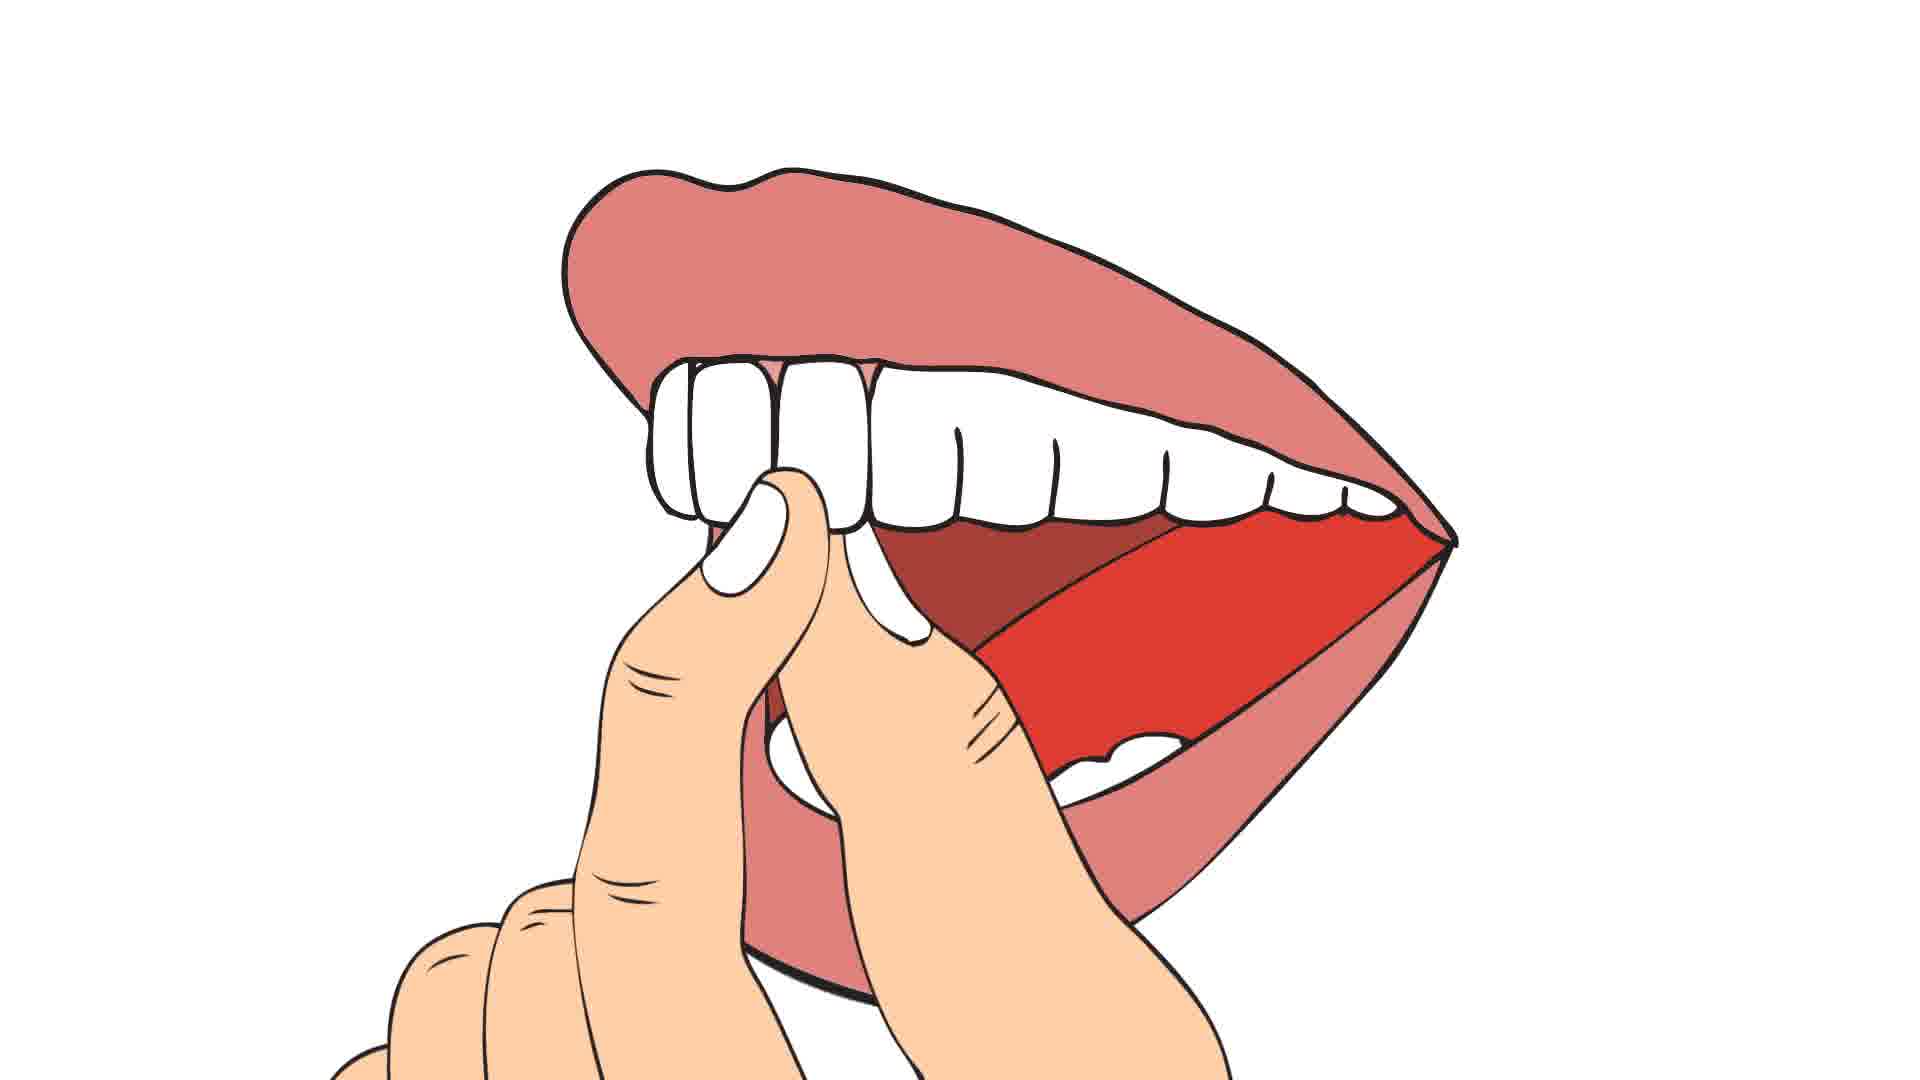 dental clipart wobbly tooth